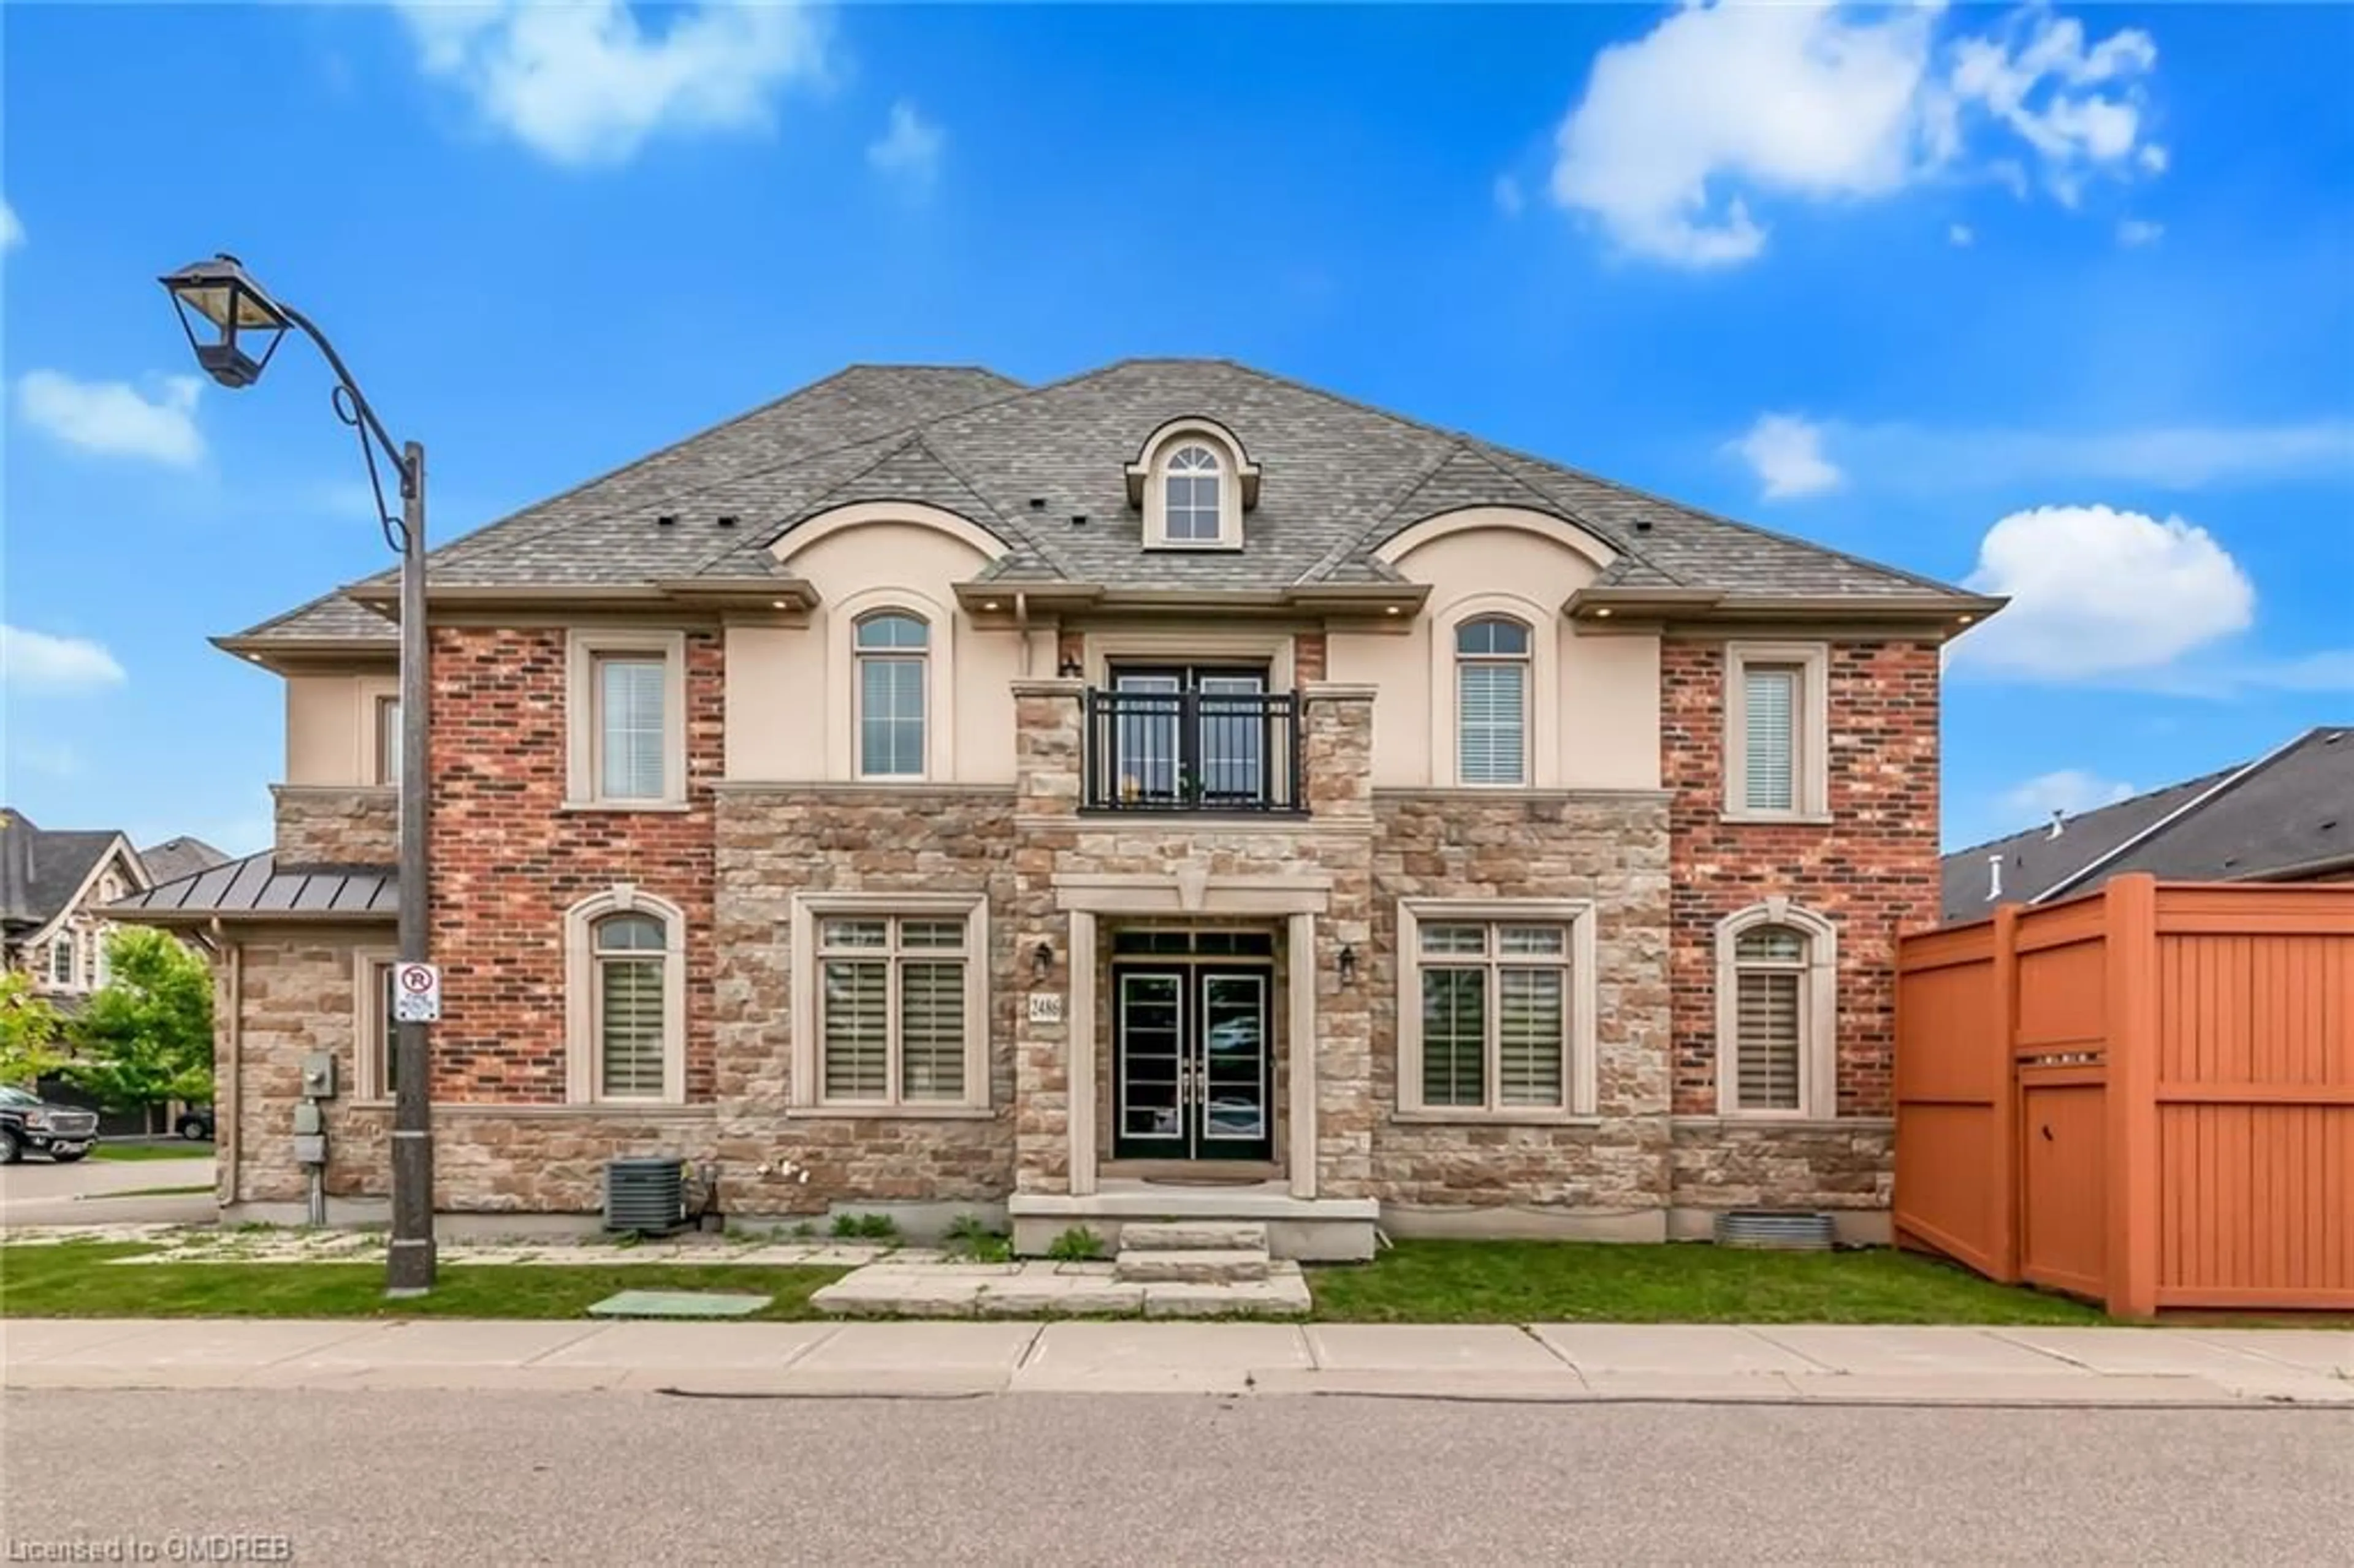 Home with brick exterior material for 2486 Village Common Dr, Oakville Ontario L6M 0S2